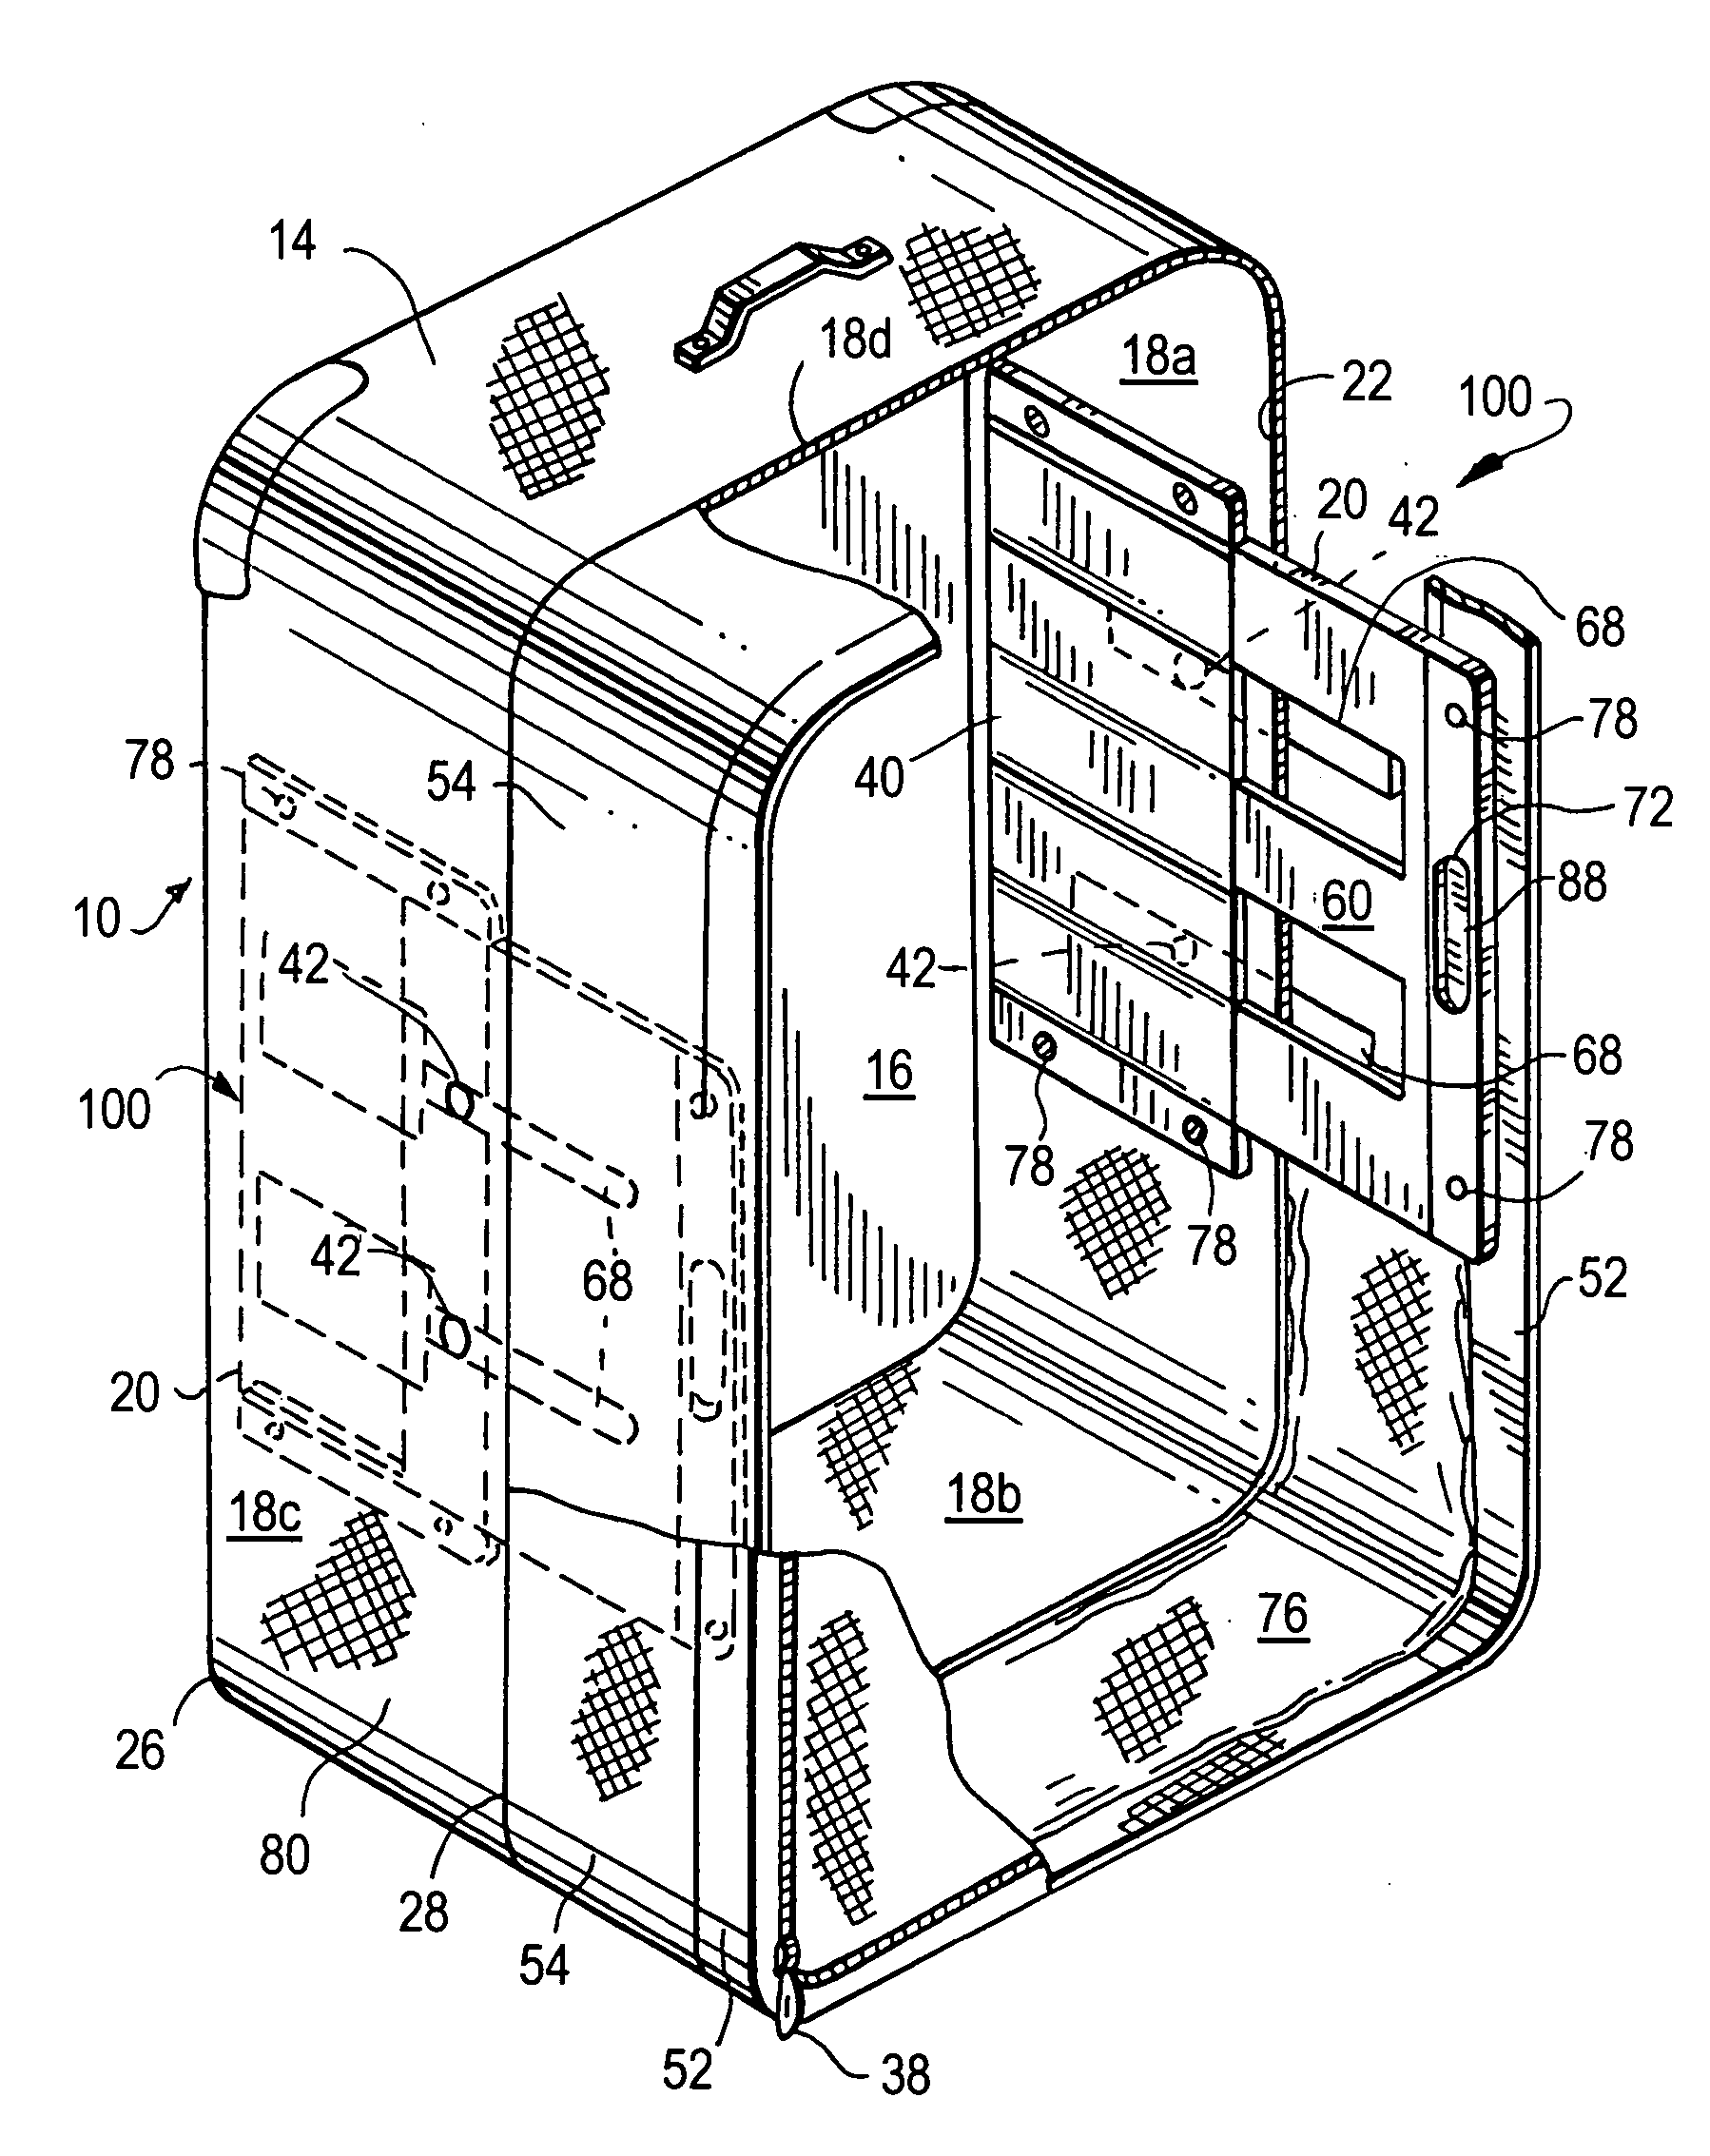 Expandable luggage with locking expansion mechanism